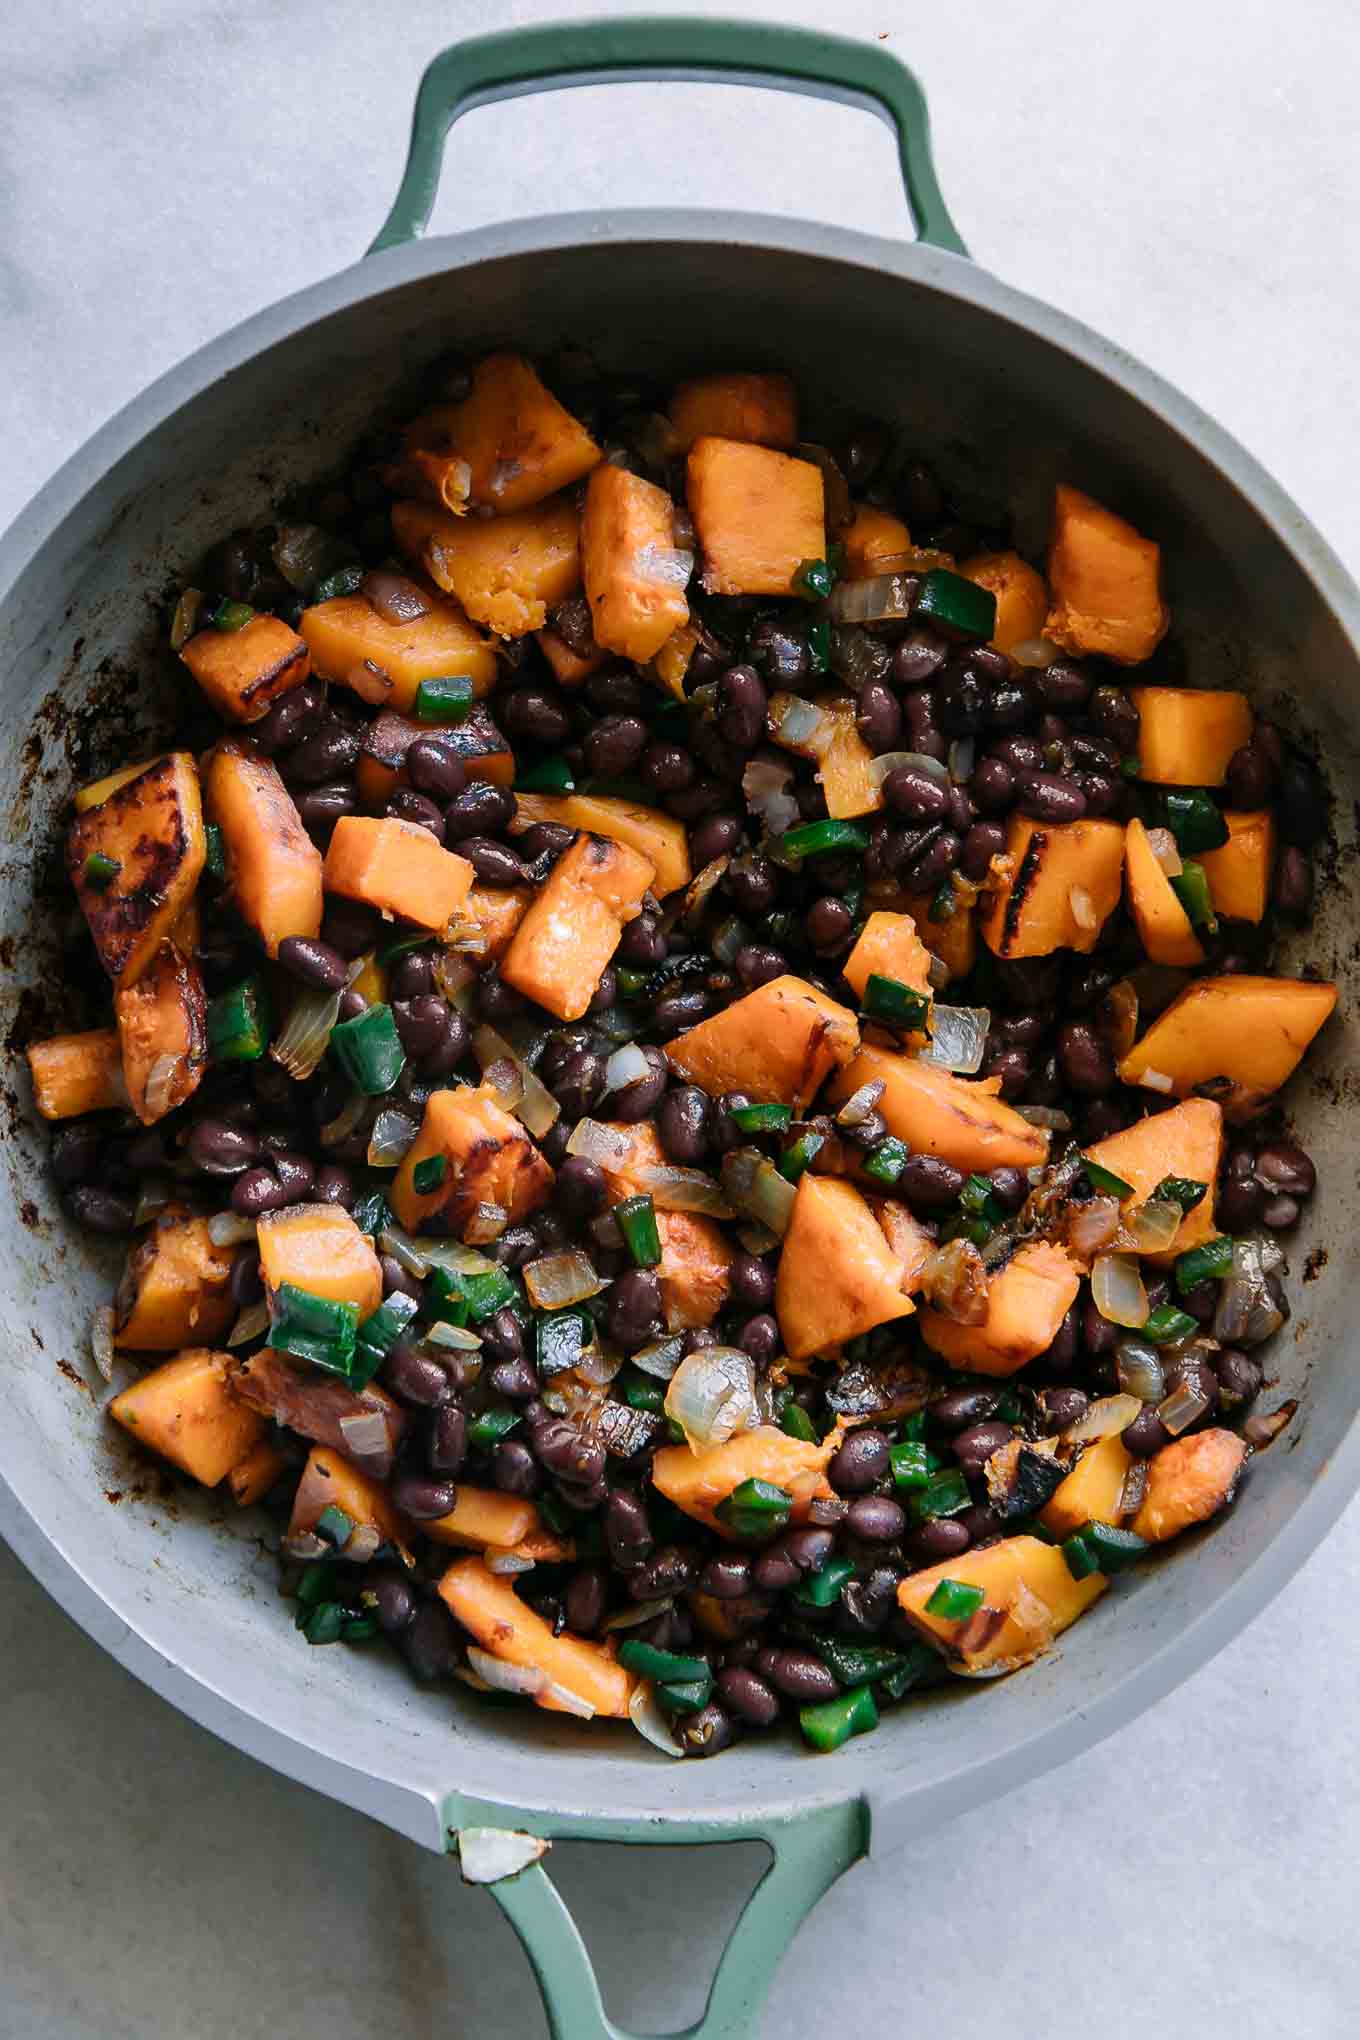 cooked butternut squash, black beans, onions, and spices for enchiladas in a green pan